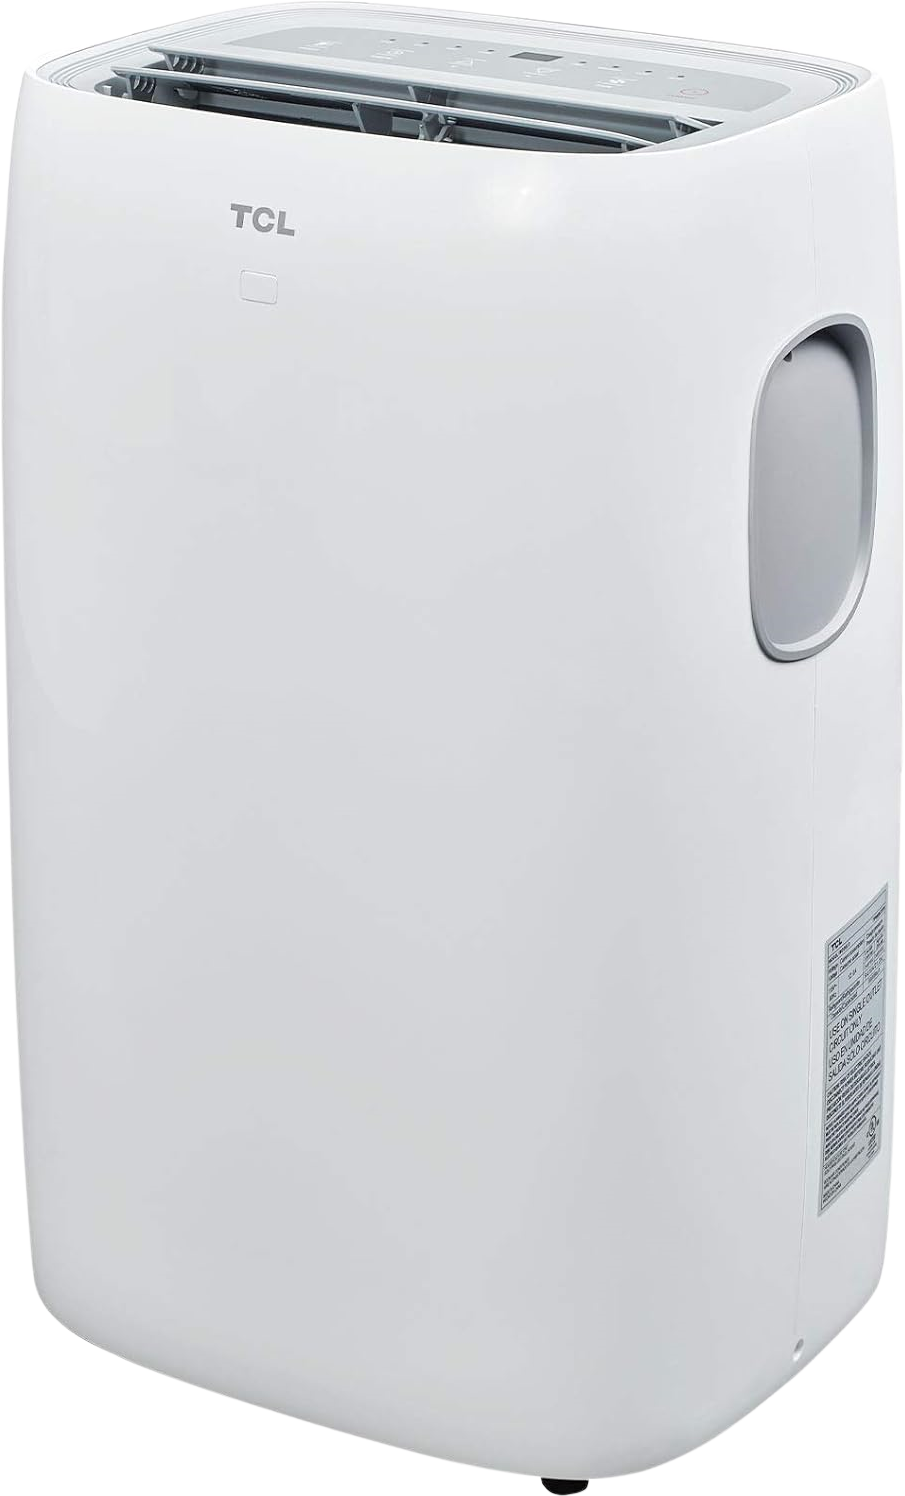 TCL, TCL 12,000 BTU 3-In-1 Portable Air Conditioner and Dehumidifier Covers 300 sq. ft. Remote Control 12P32 New